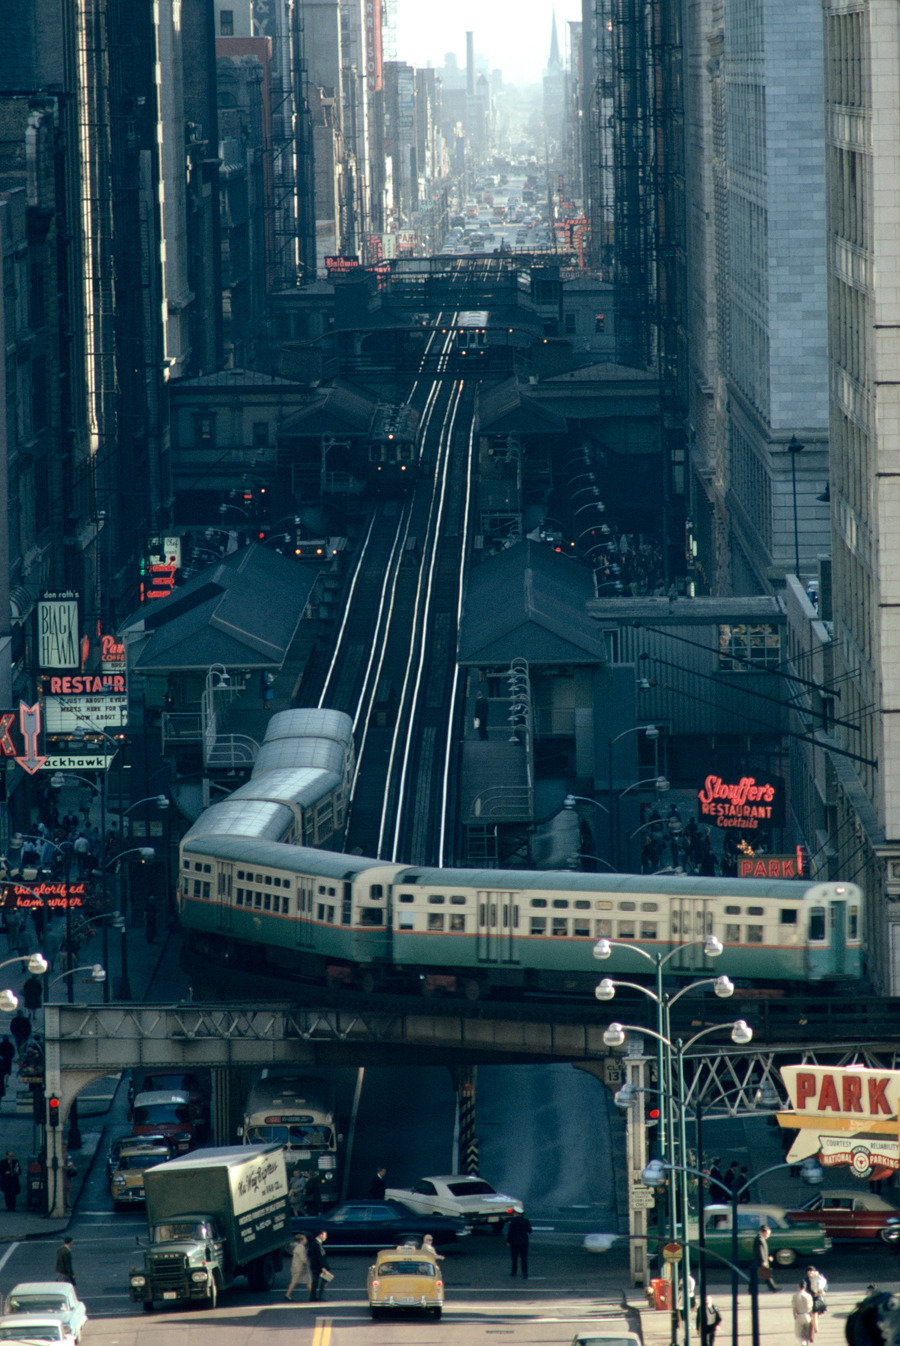 Looking south on Chicago's Wabash Avenue in 1967